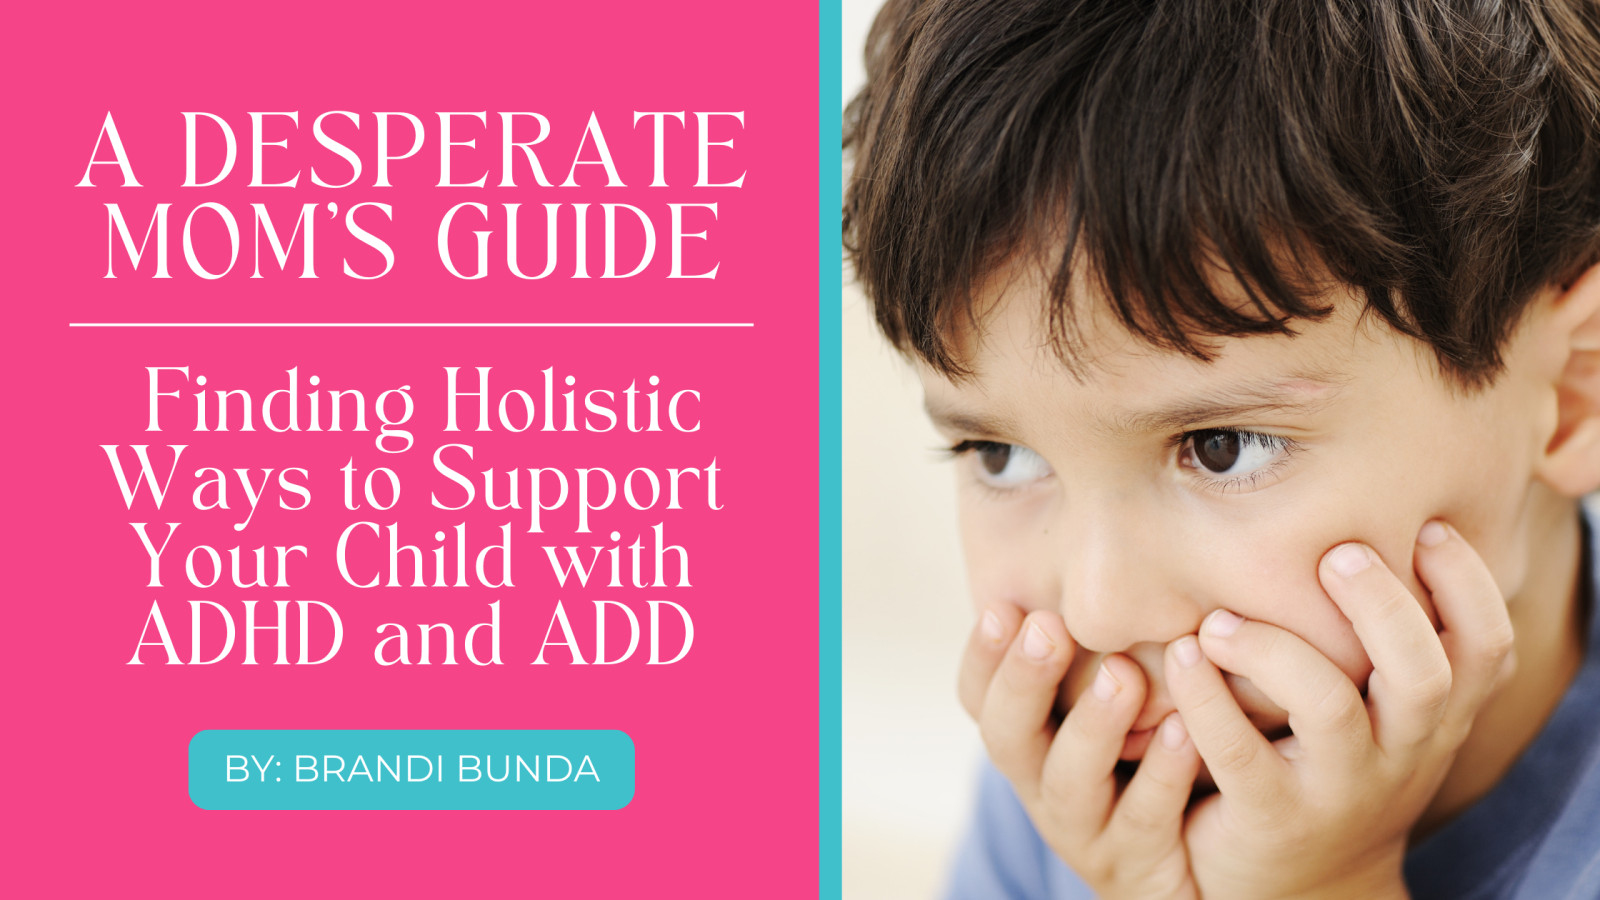 Holistic Ways to Support Your Child with ADHD and ADD